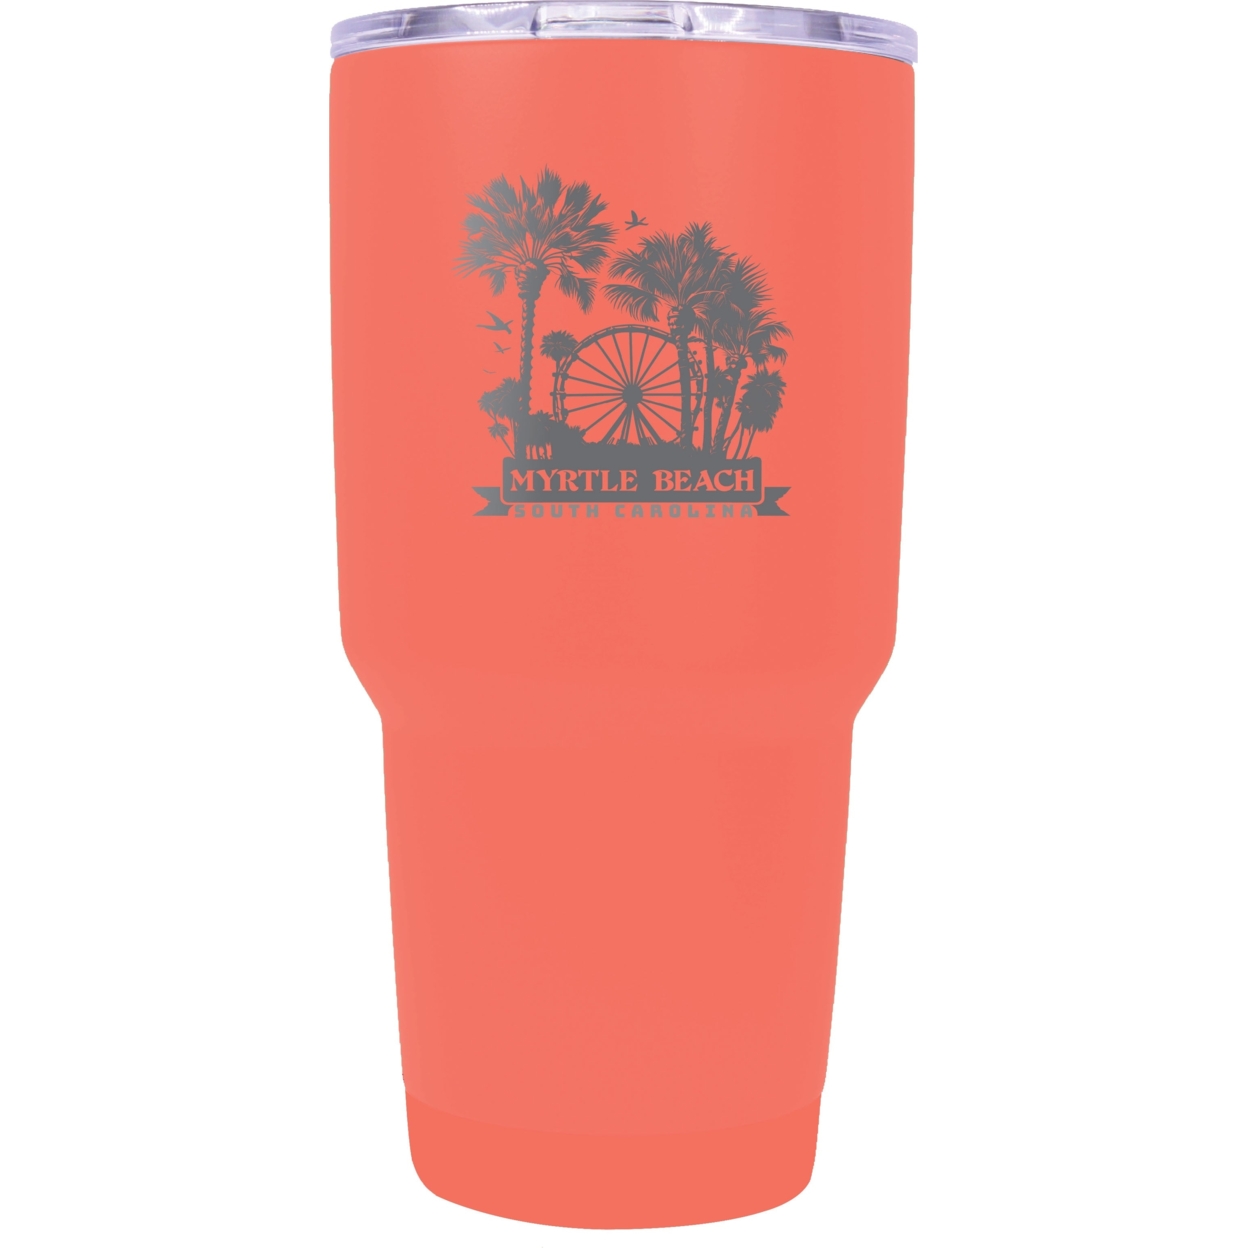 Myrtle Beach South Carolina Laser Etched Souvenir 24 Oz Insulated Stainless Steel Tumbler - Seafoam